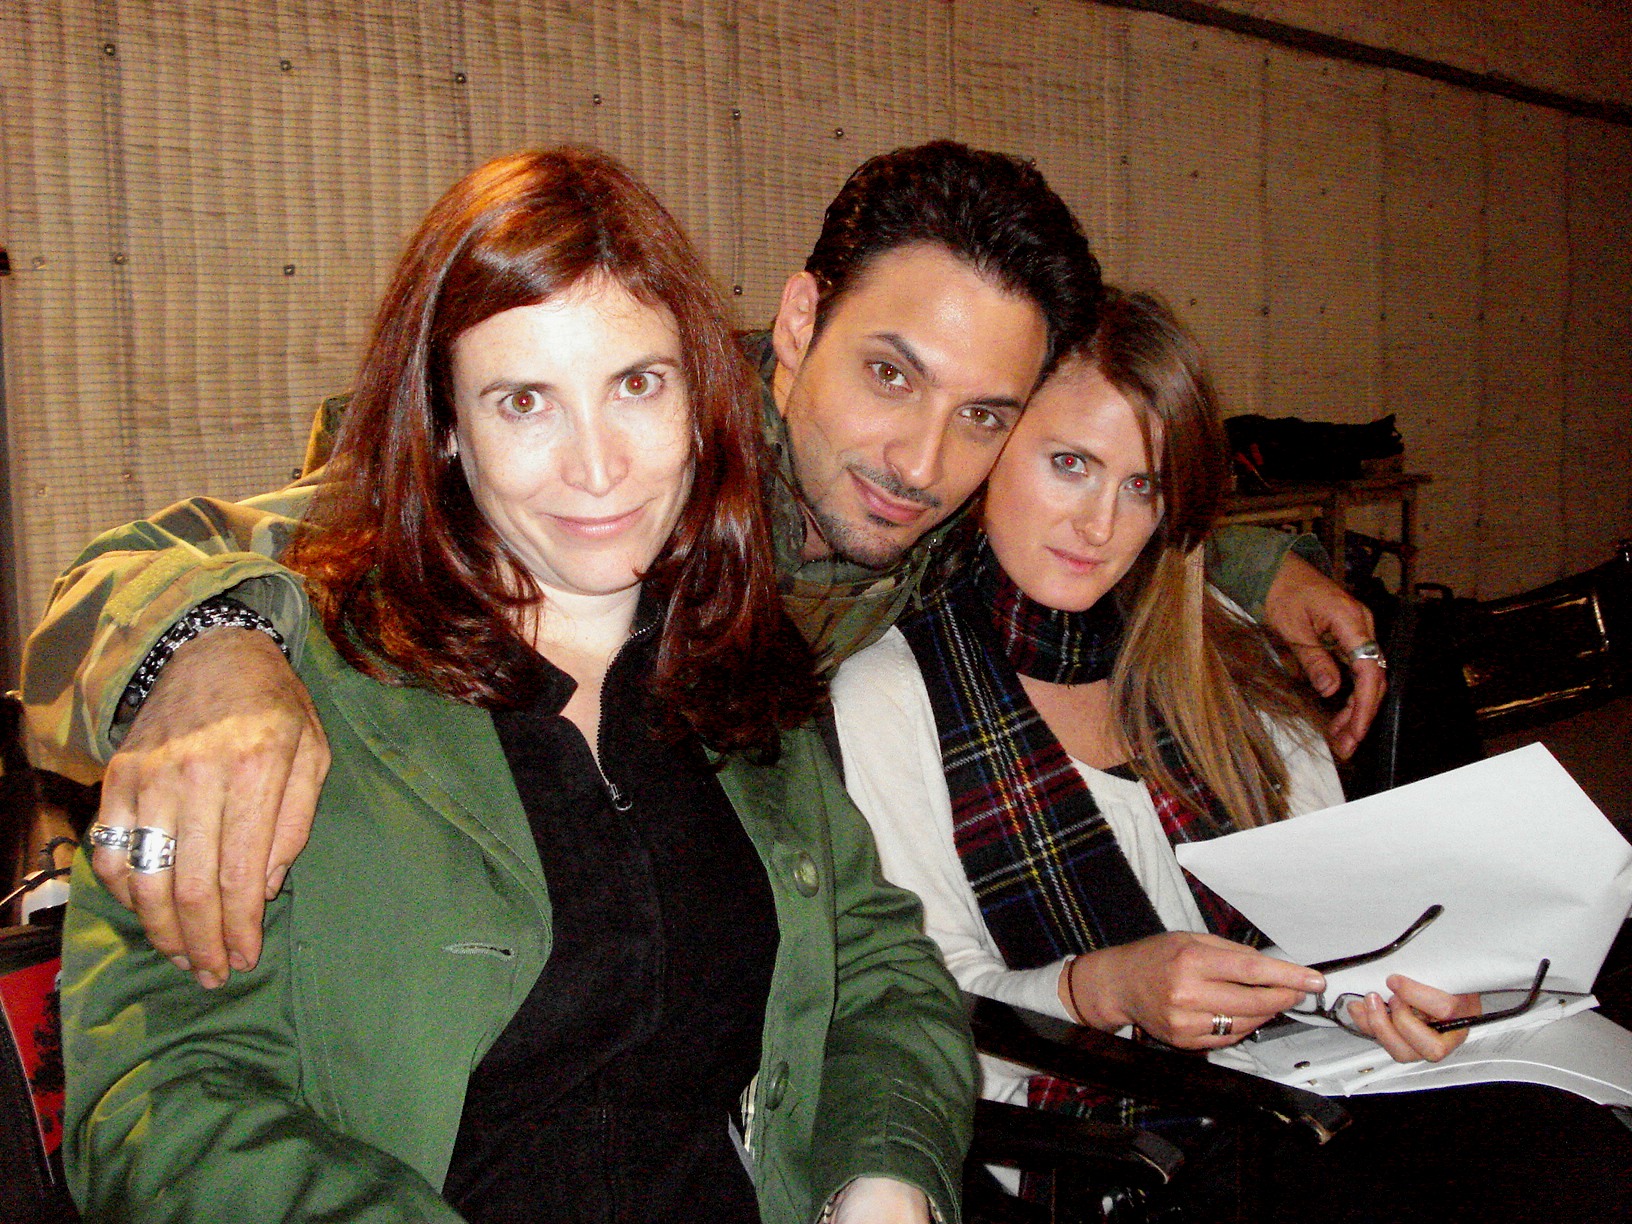 Paula Devonshire, Stefano DiMatteo and Ara Katz, behind the scenes during shooting of Survival of the Dead.